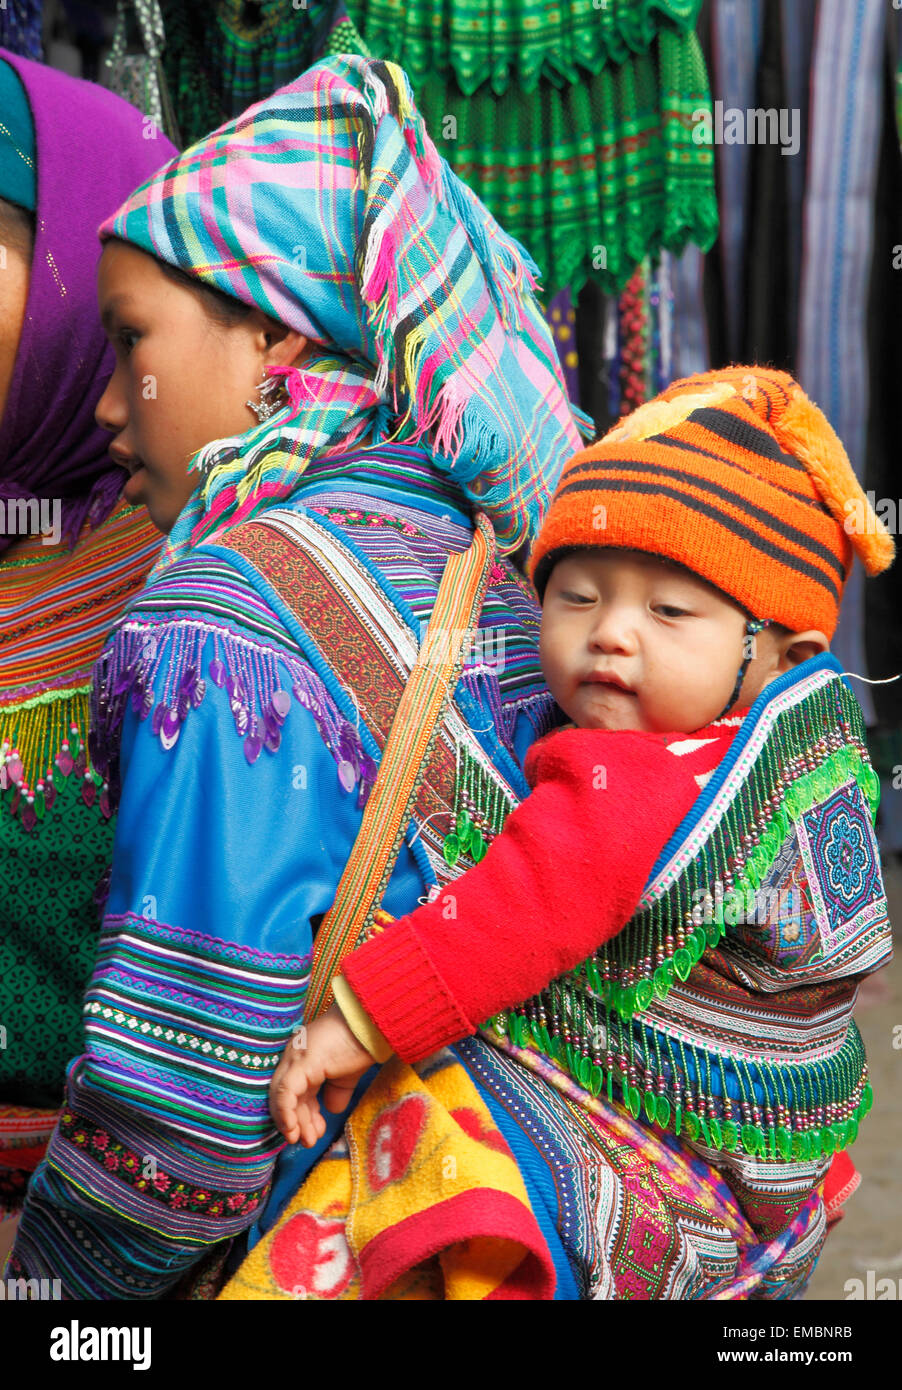 Vietnam, Lao Cai Province, Bac Ha, market, hill tribes people, mother and daughter, Stock Photo